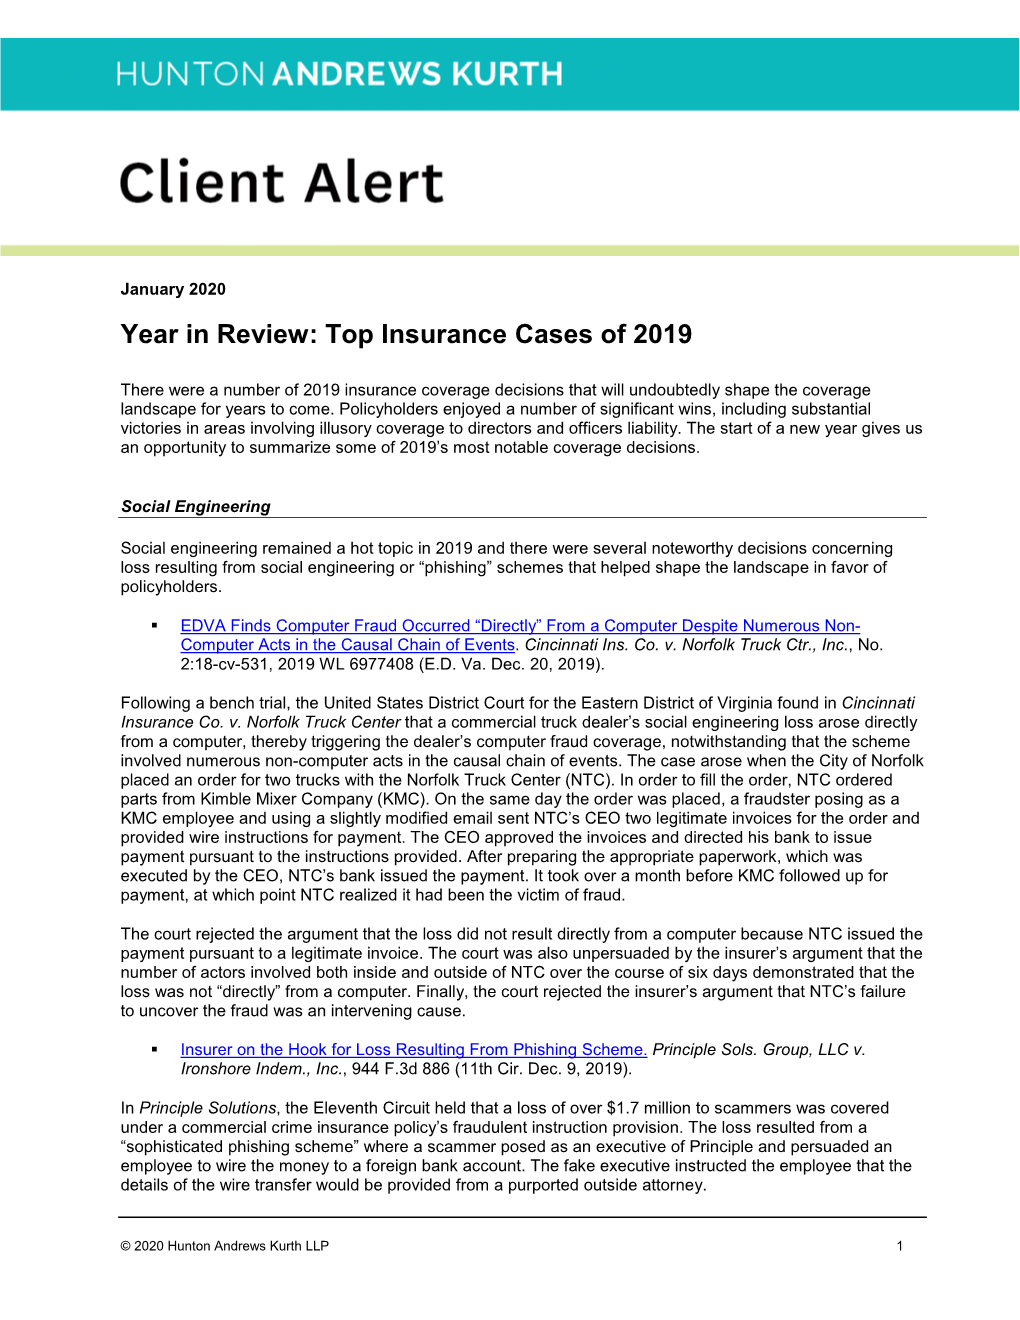 Year in Review: Top Insurance Cases of 2019